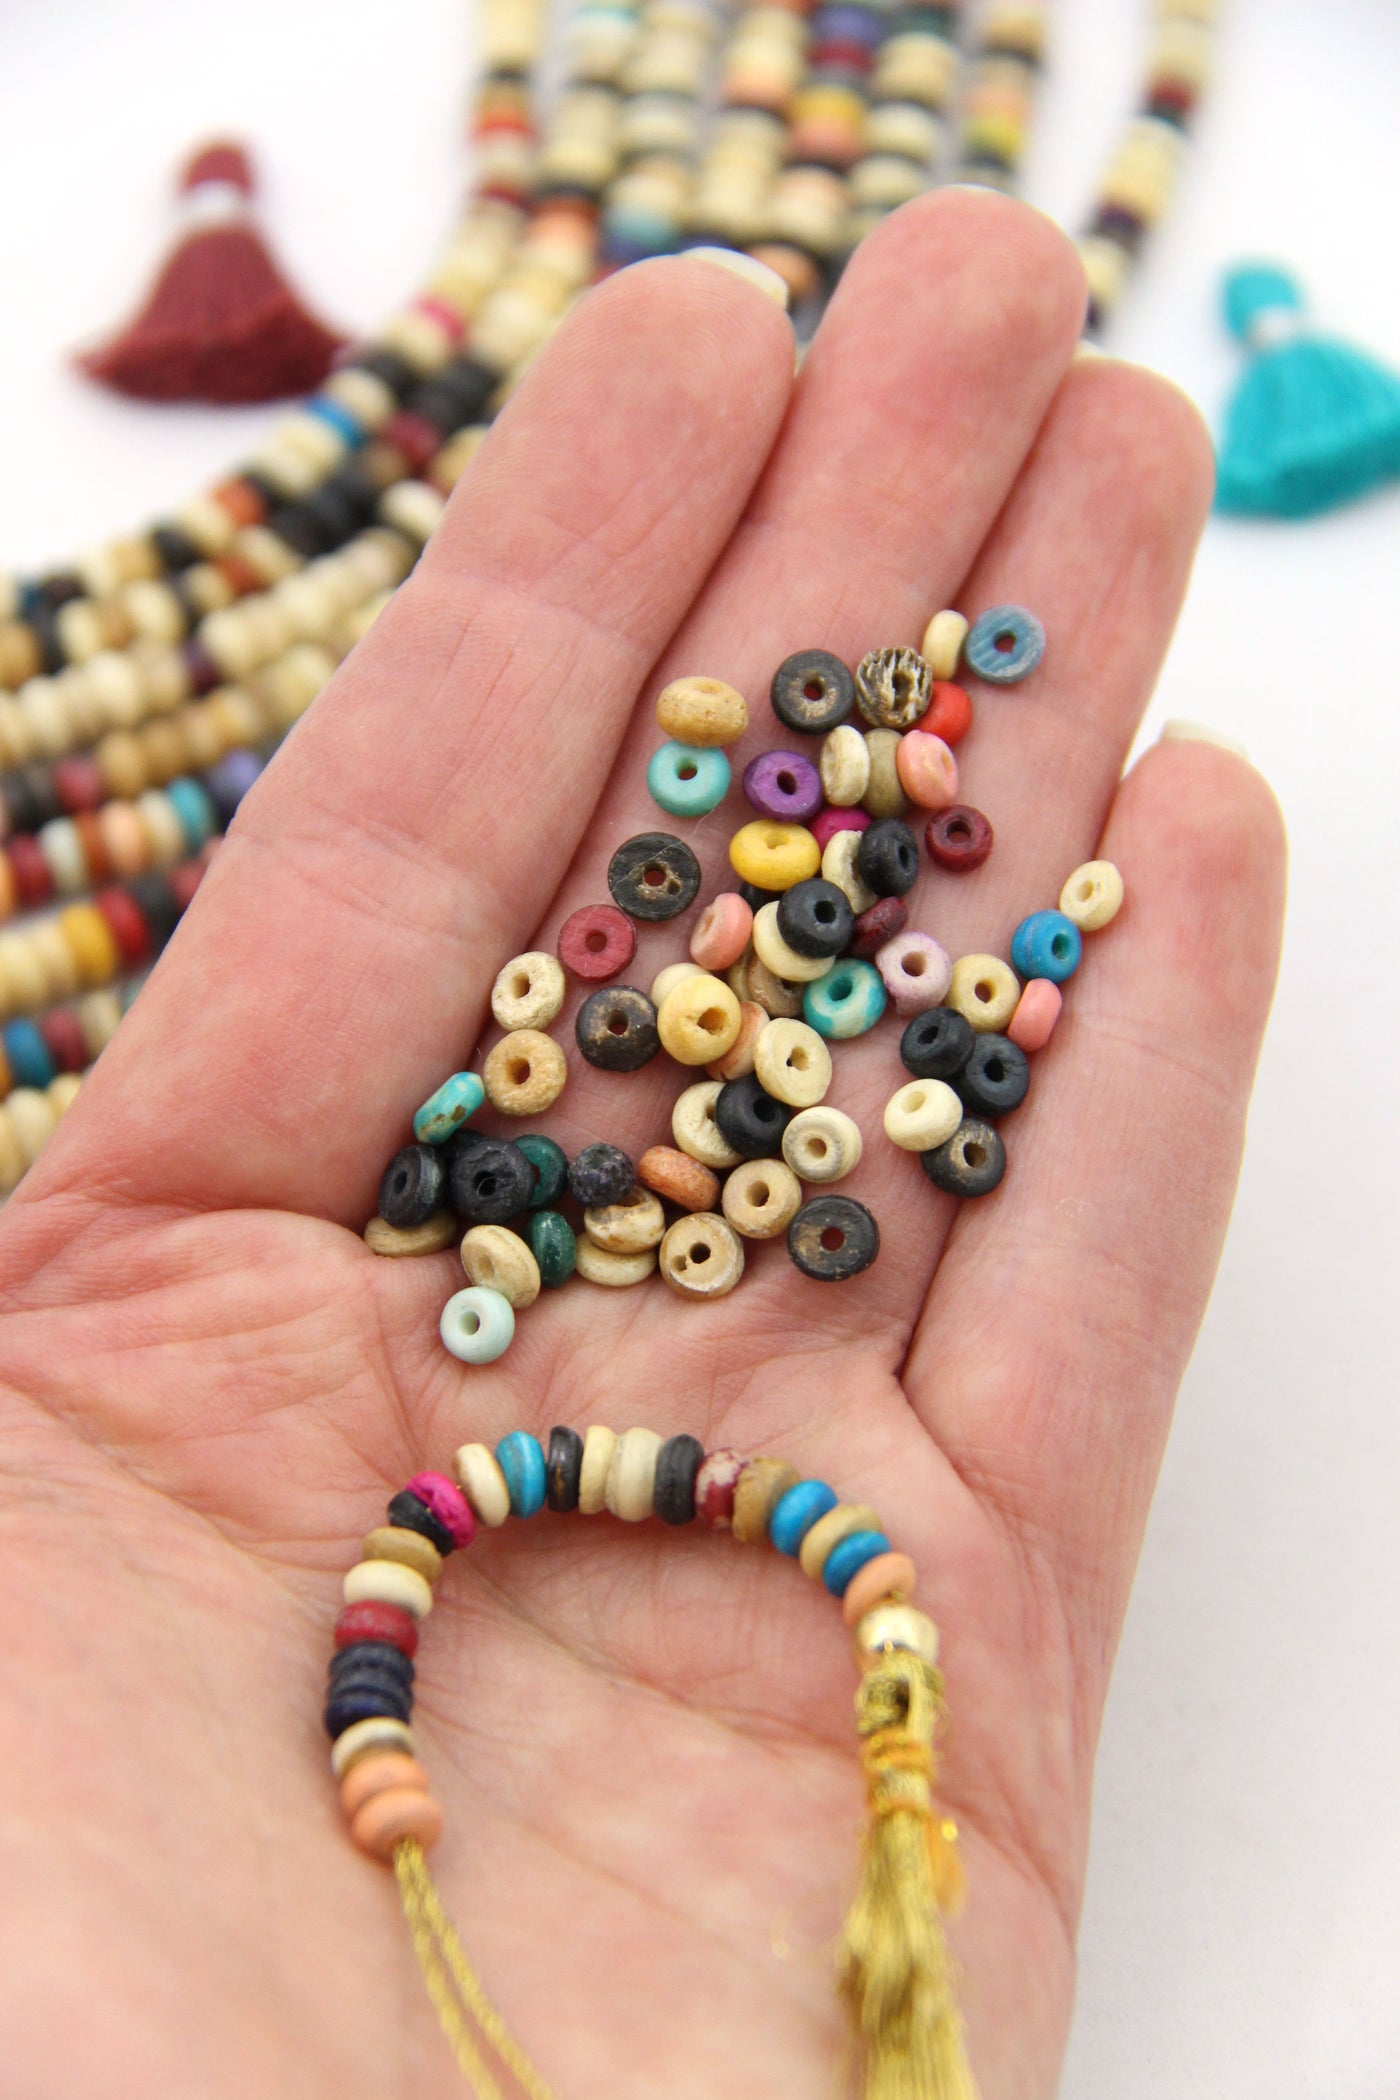 Tussy Mussy Heishi Natural Spacer Beads: 6x2mm Multi Colored Discs - ShopWomanShopsWorld.com for Artisan made DIY jewelry and craft supplies, natural beads, African Beads, tassels